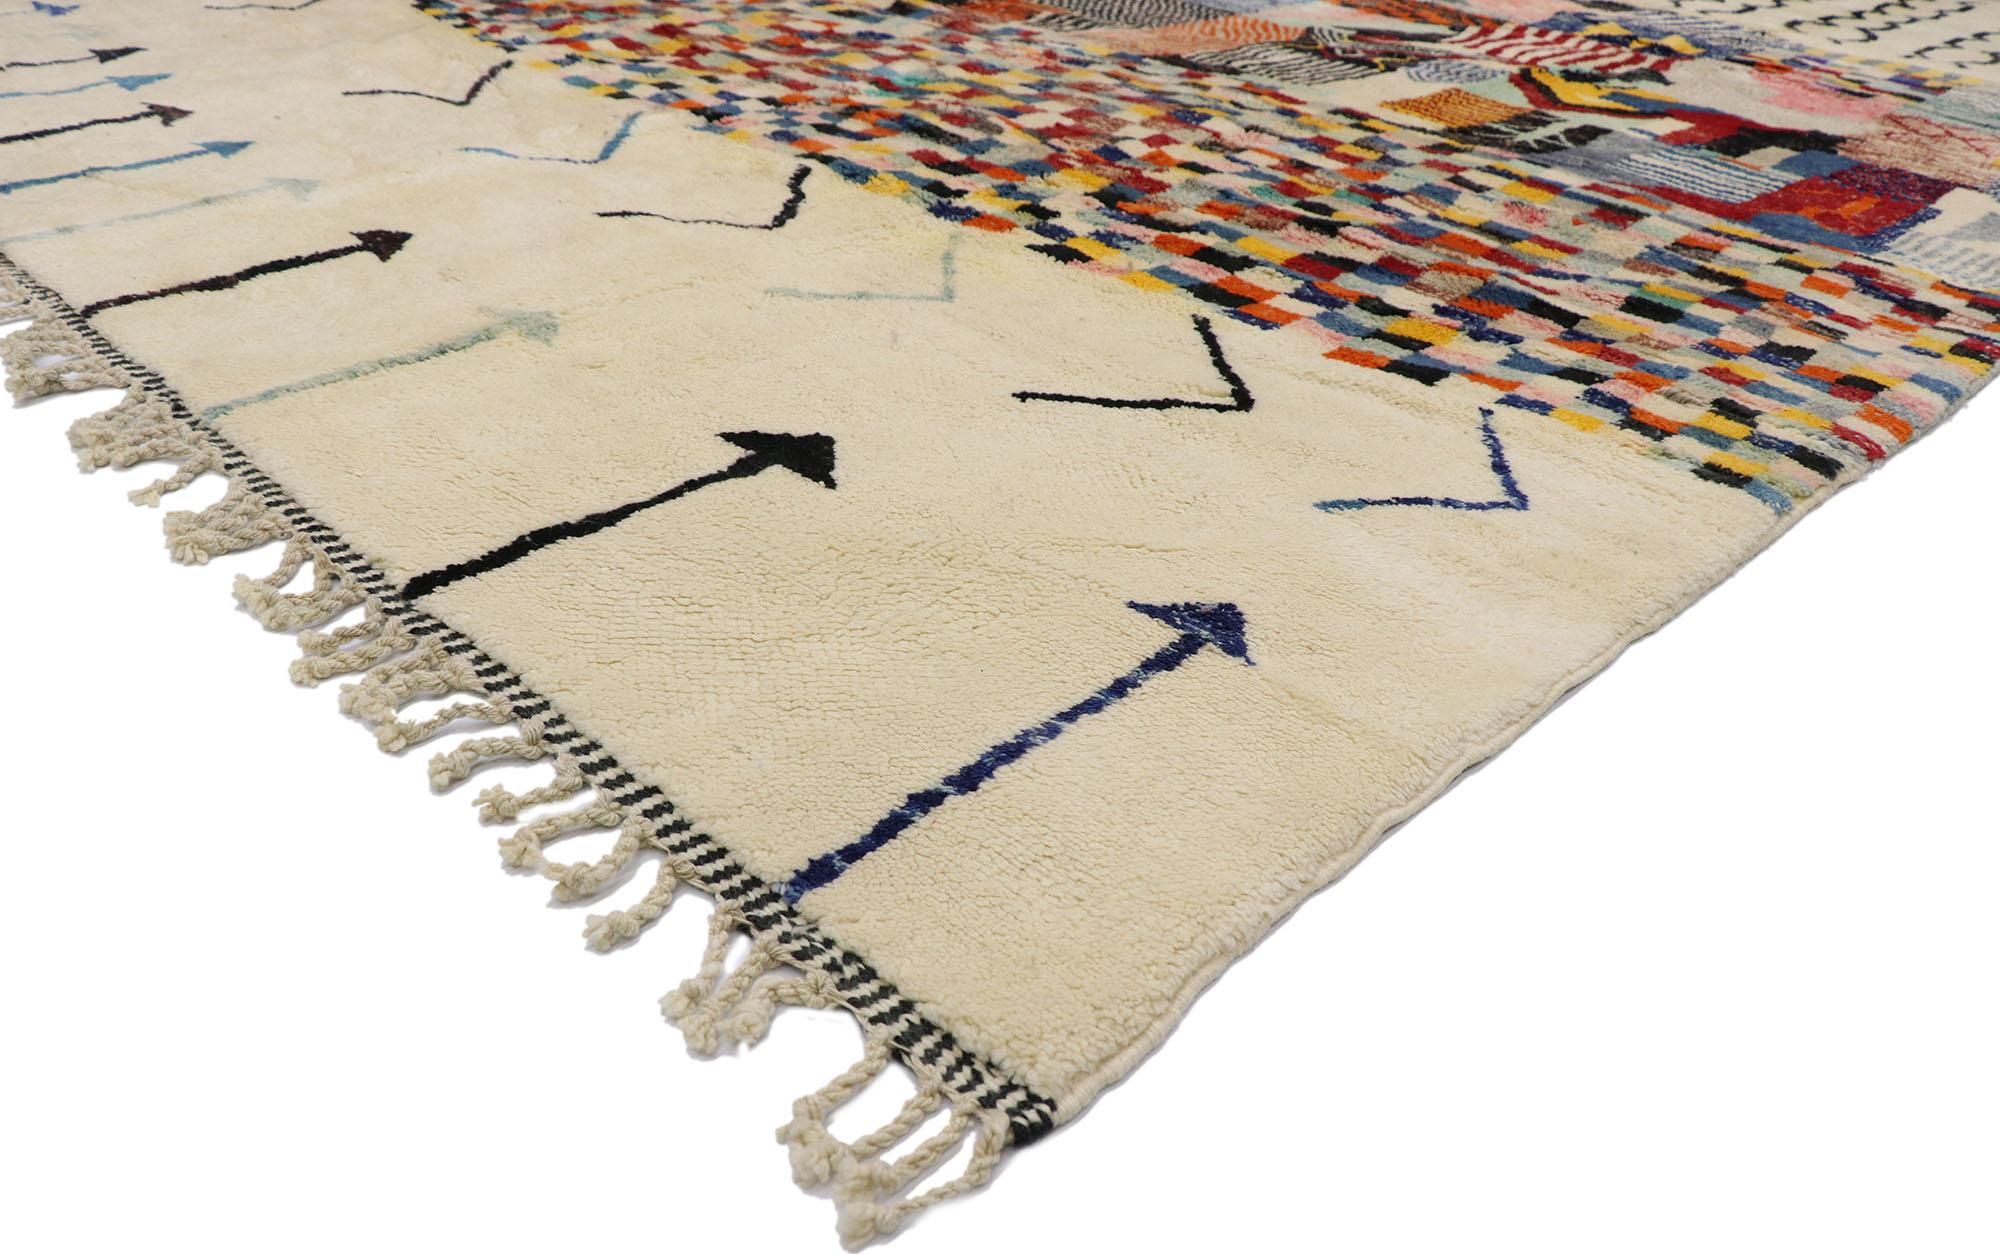 21180 new Contemporary Berber Moroccan rug inspired by Gunta Stölzl 09'05 x 12'07. Showcasing a bold expressive design, incredible detail and texture, this hand knotted wool contemporary Berber Moroccan rug is a captivating vision of woven beauty.